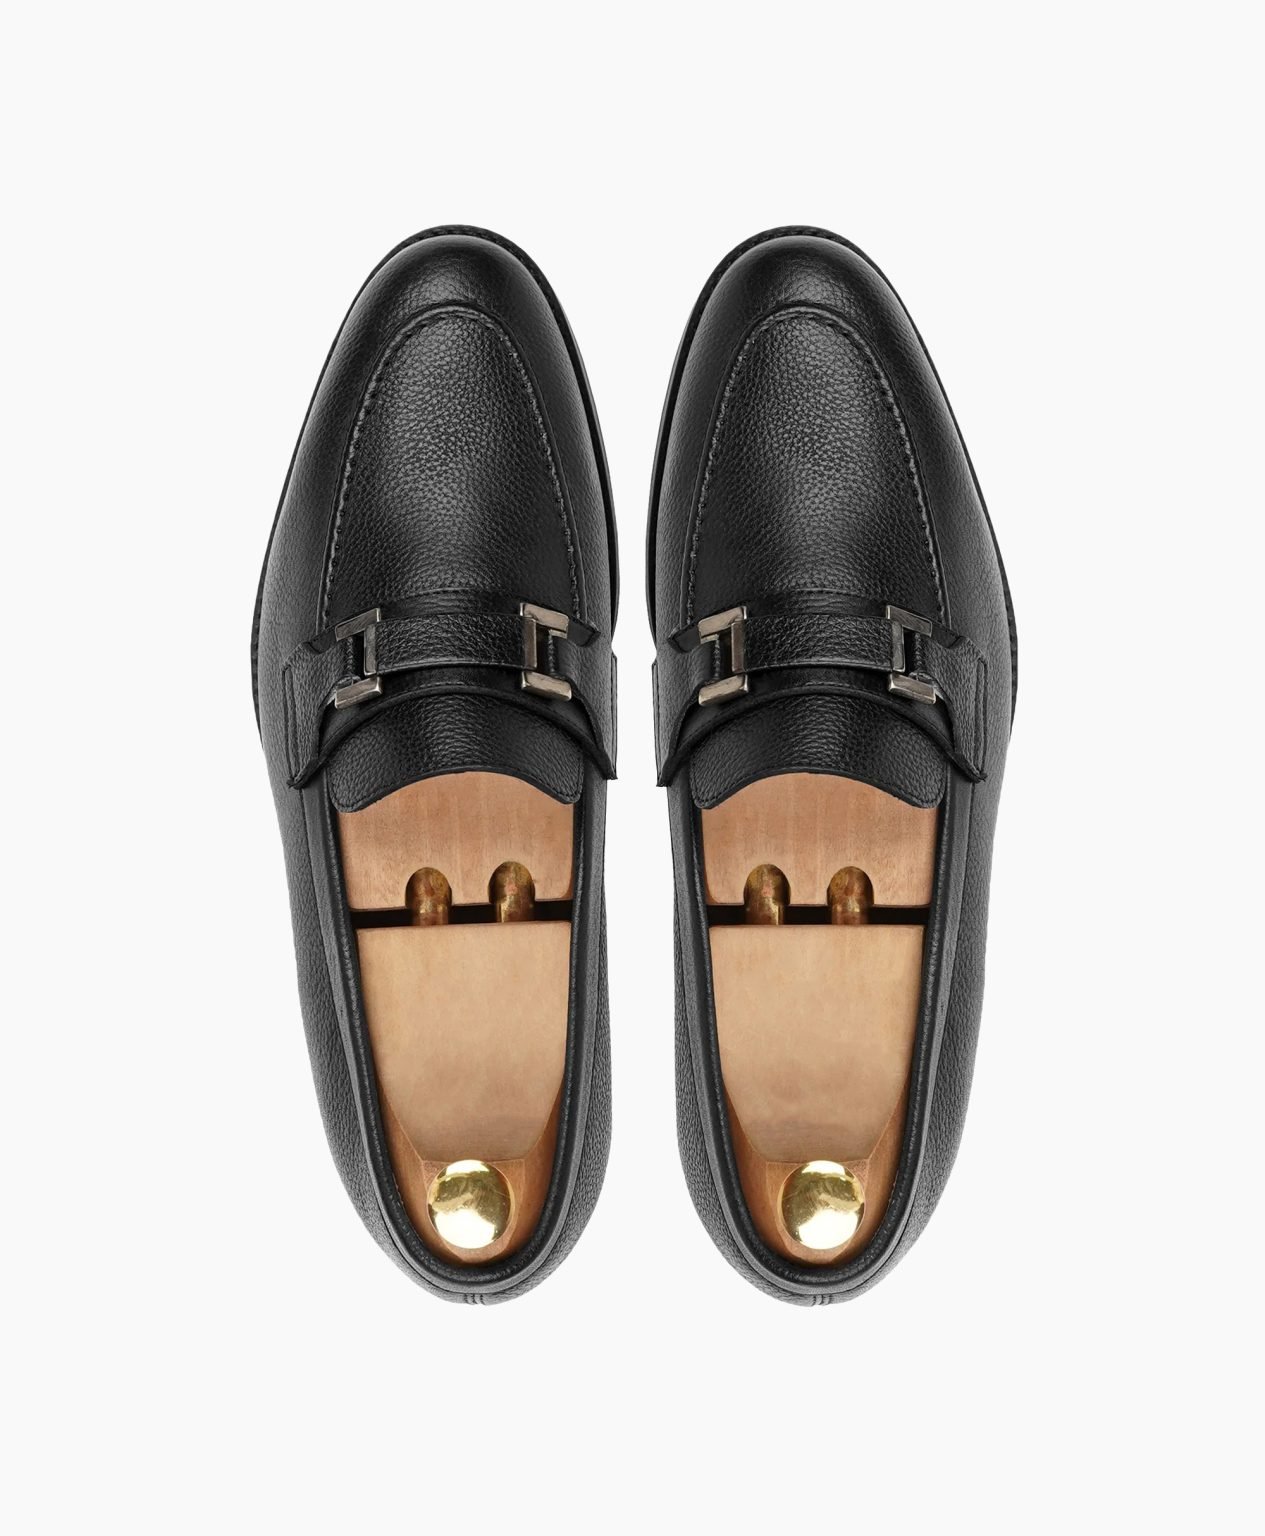 exeter-black-leather-loafers-image202